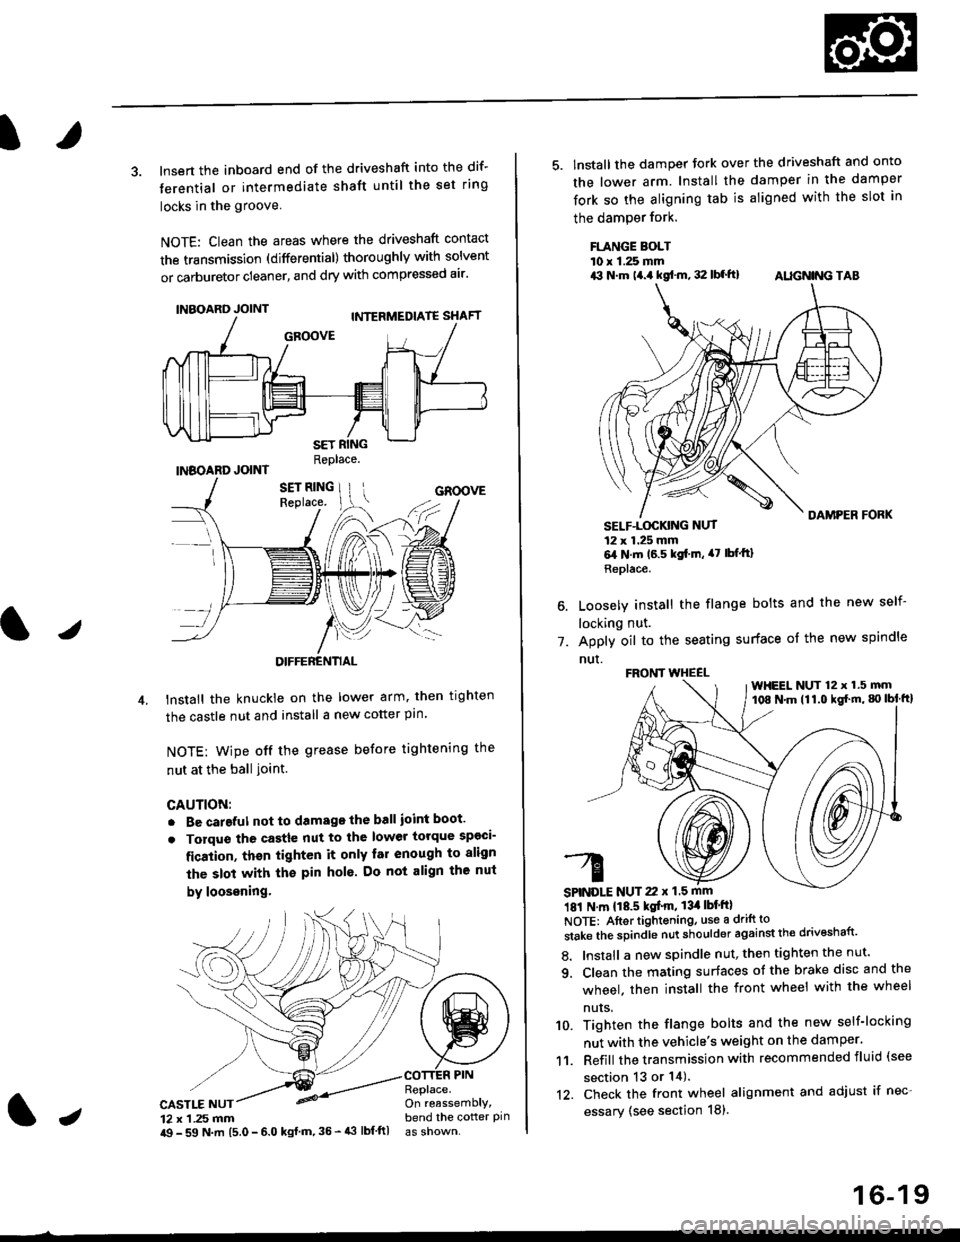 HONDA CIVIC 1997 6.G Workshop Manual 3. lnsert the inboard end of the driveshaft into the dif-
terential or intermediate shaft until the set ring
locks in the groove
NOTE: Clean the areas where the driveshaft contact
the transmission (di